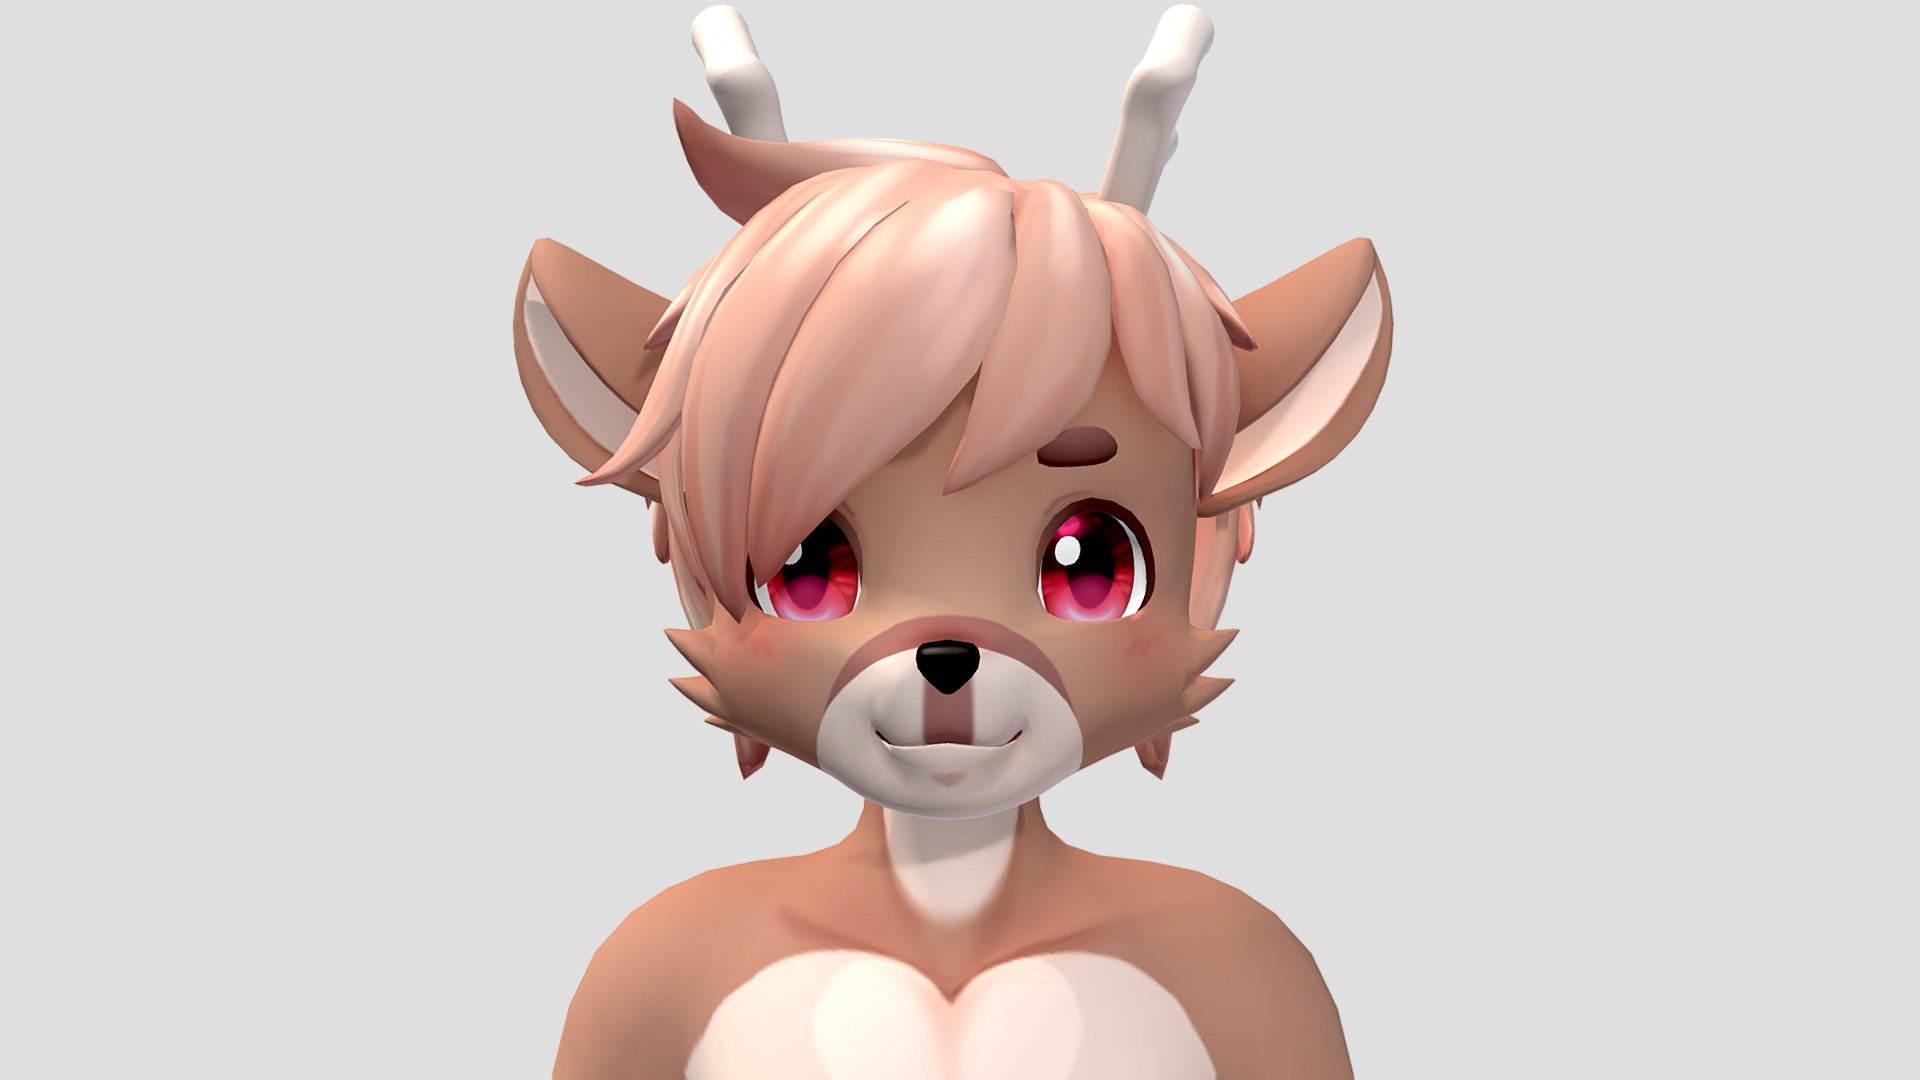 Model commission for use with MMD and VSeeFace!
This is the shaded texture version.
 

His 2D Cel style variant is here: https://skfb.ly/otu7S - Vtuber/MMD Model Commission: Tobi - 3D model by Nat (@natton) 3d model